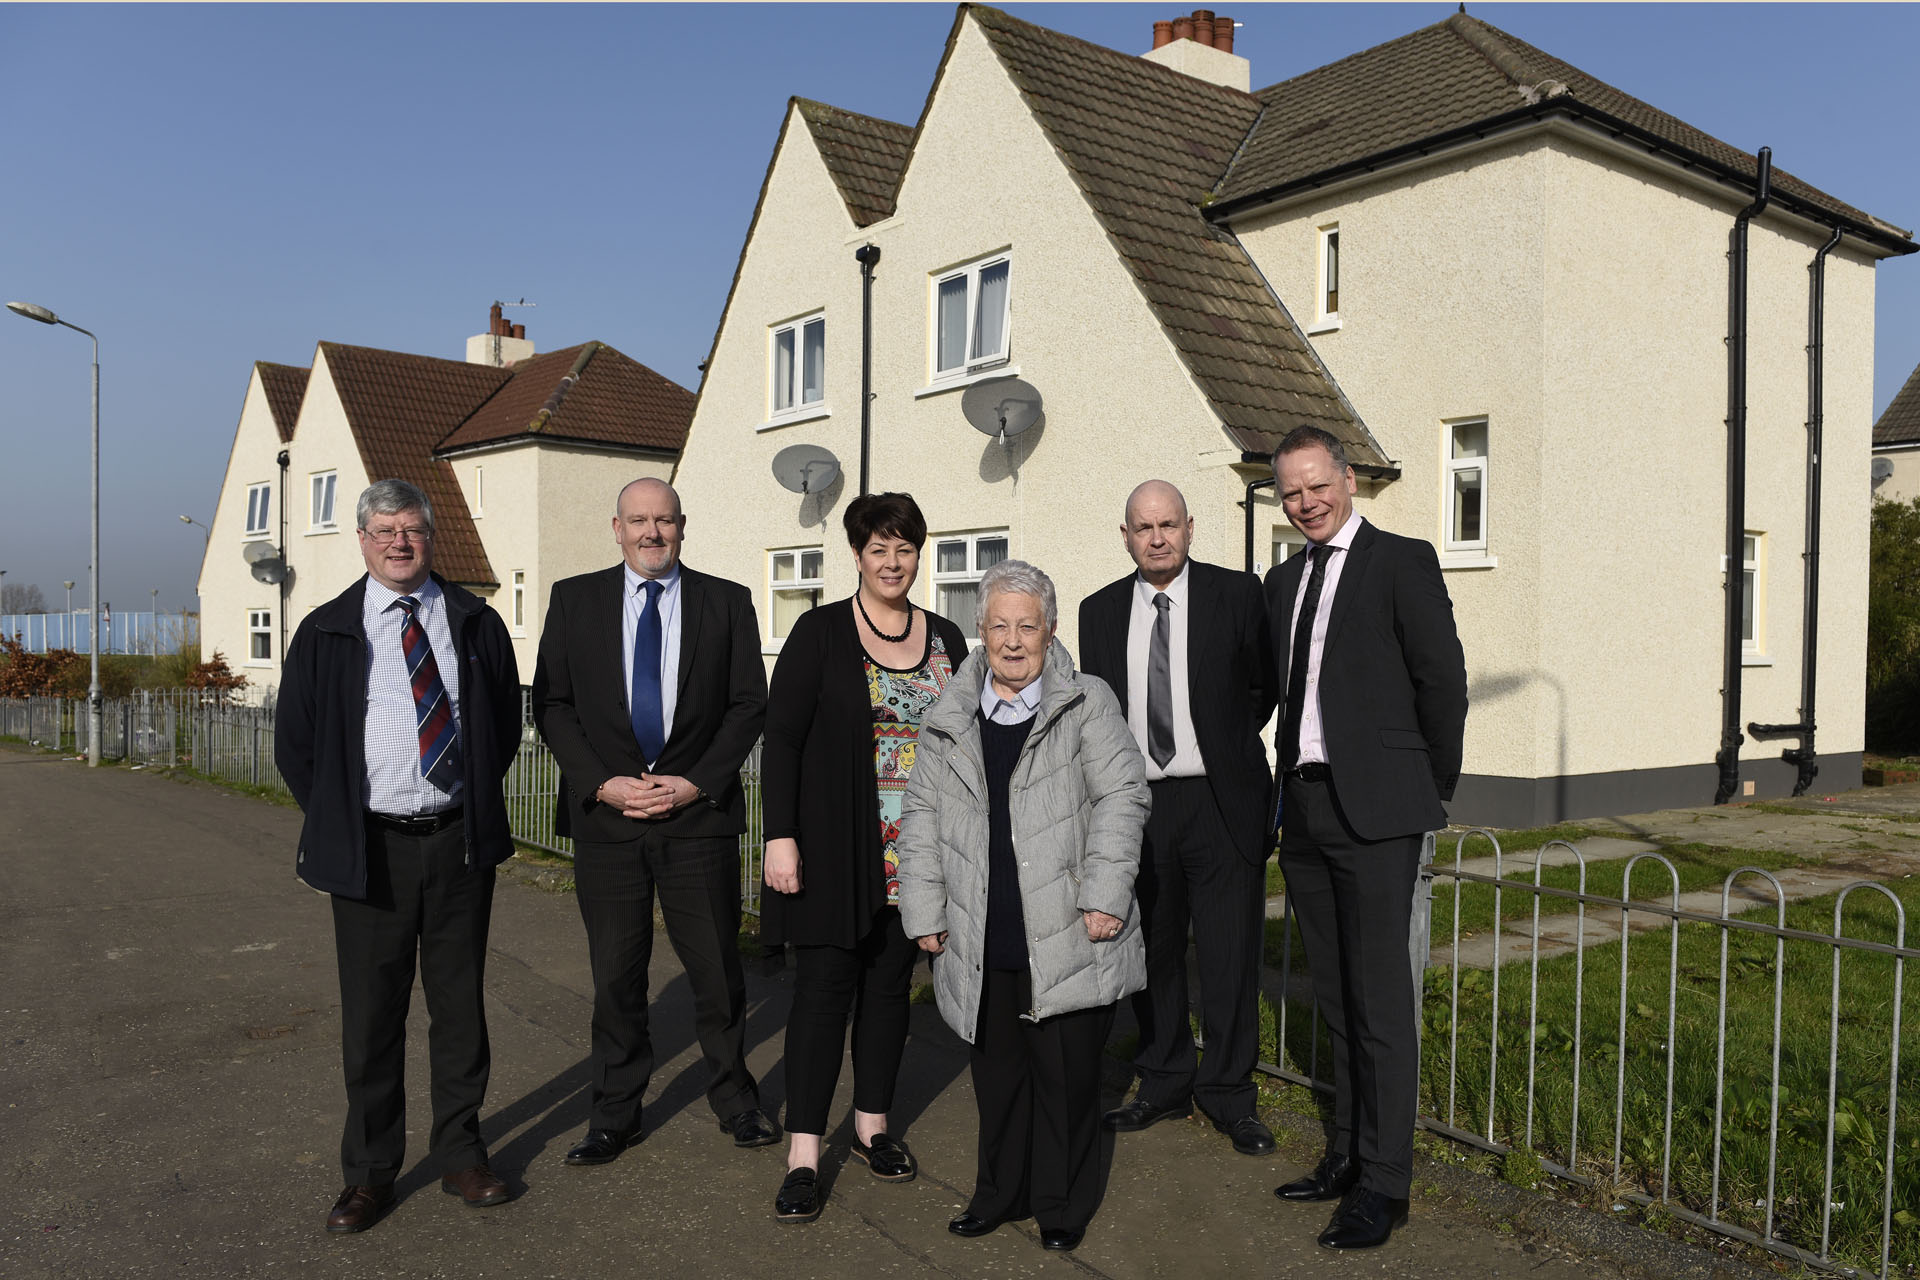 National recognition for housing asset services in East Ayrshire